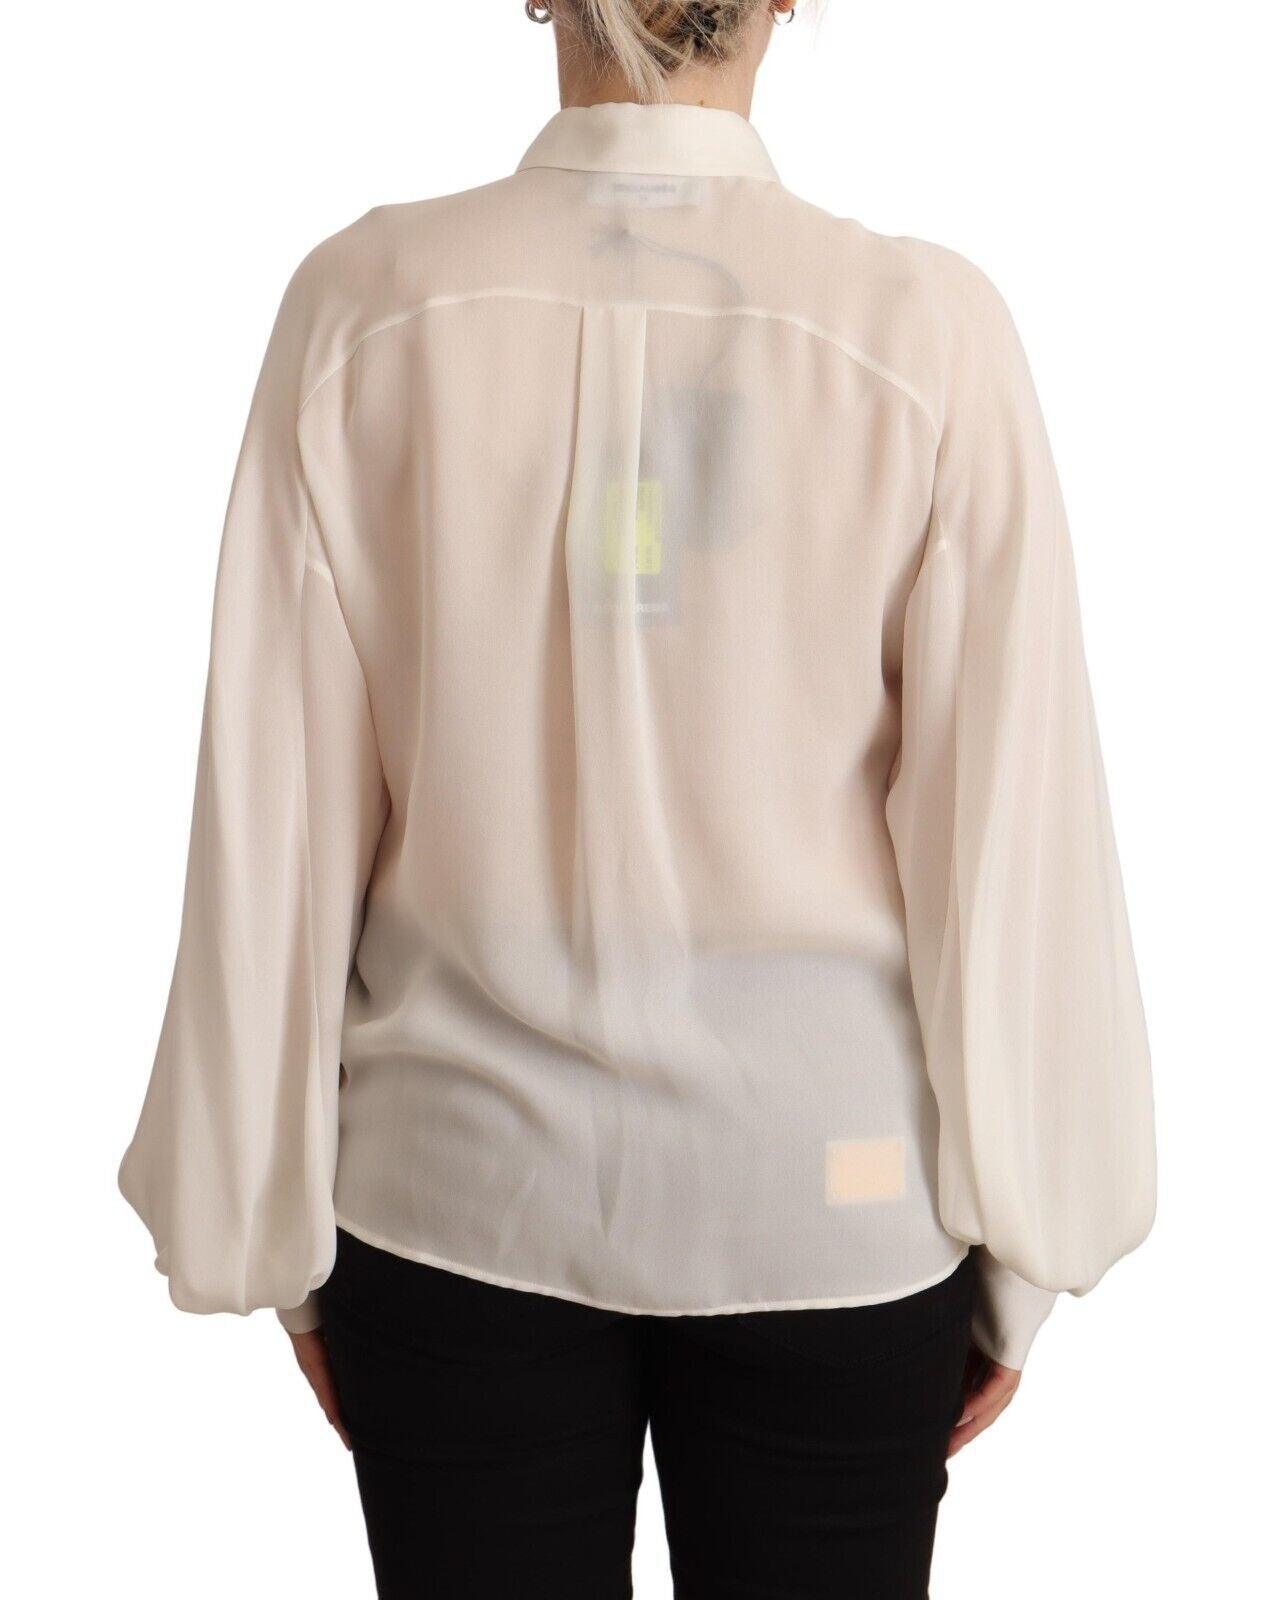 Dsquared² Off White Silk Long Sleeves Collared Blouse Top - Designed by Dsquared² Available to Buy at a Discounted Price on Moon Behind The Hill Online Designer Discount Store